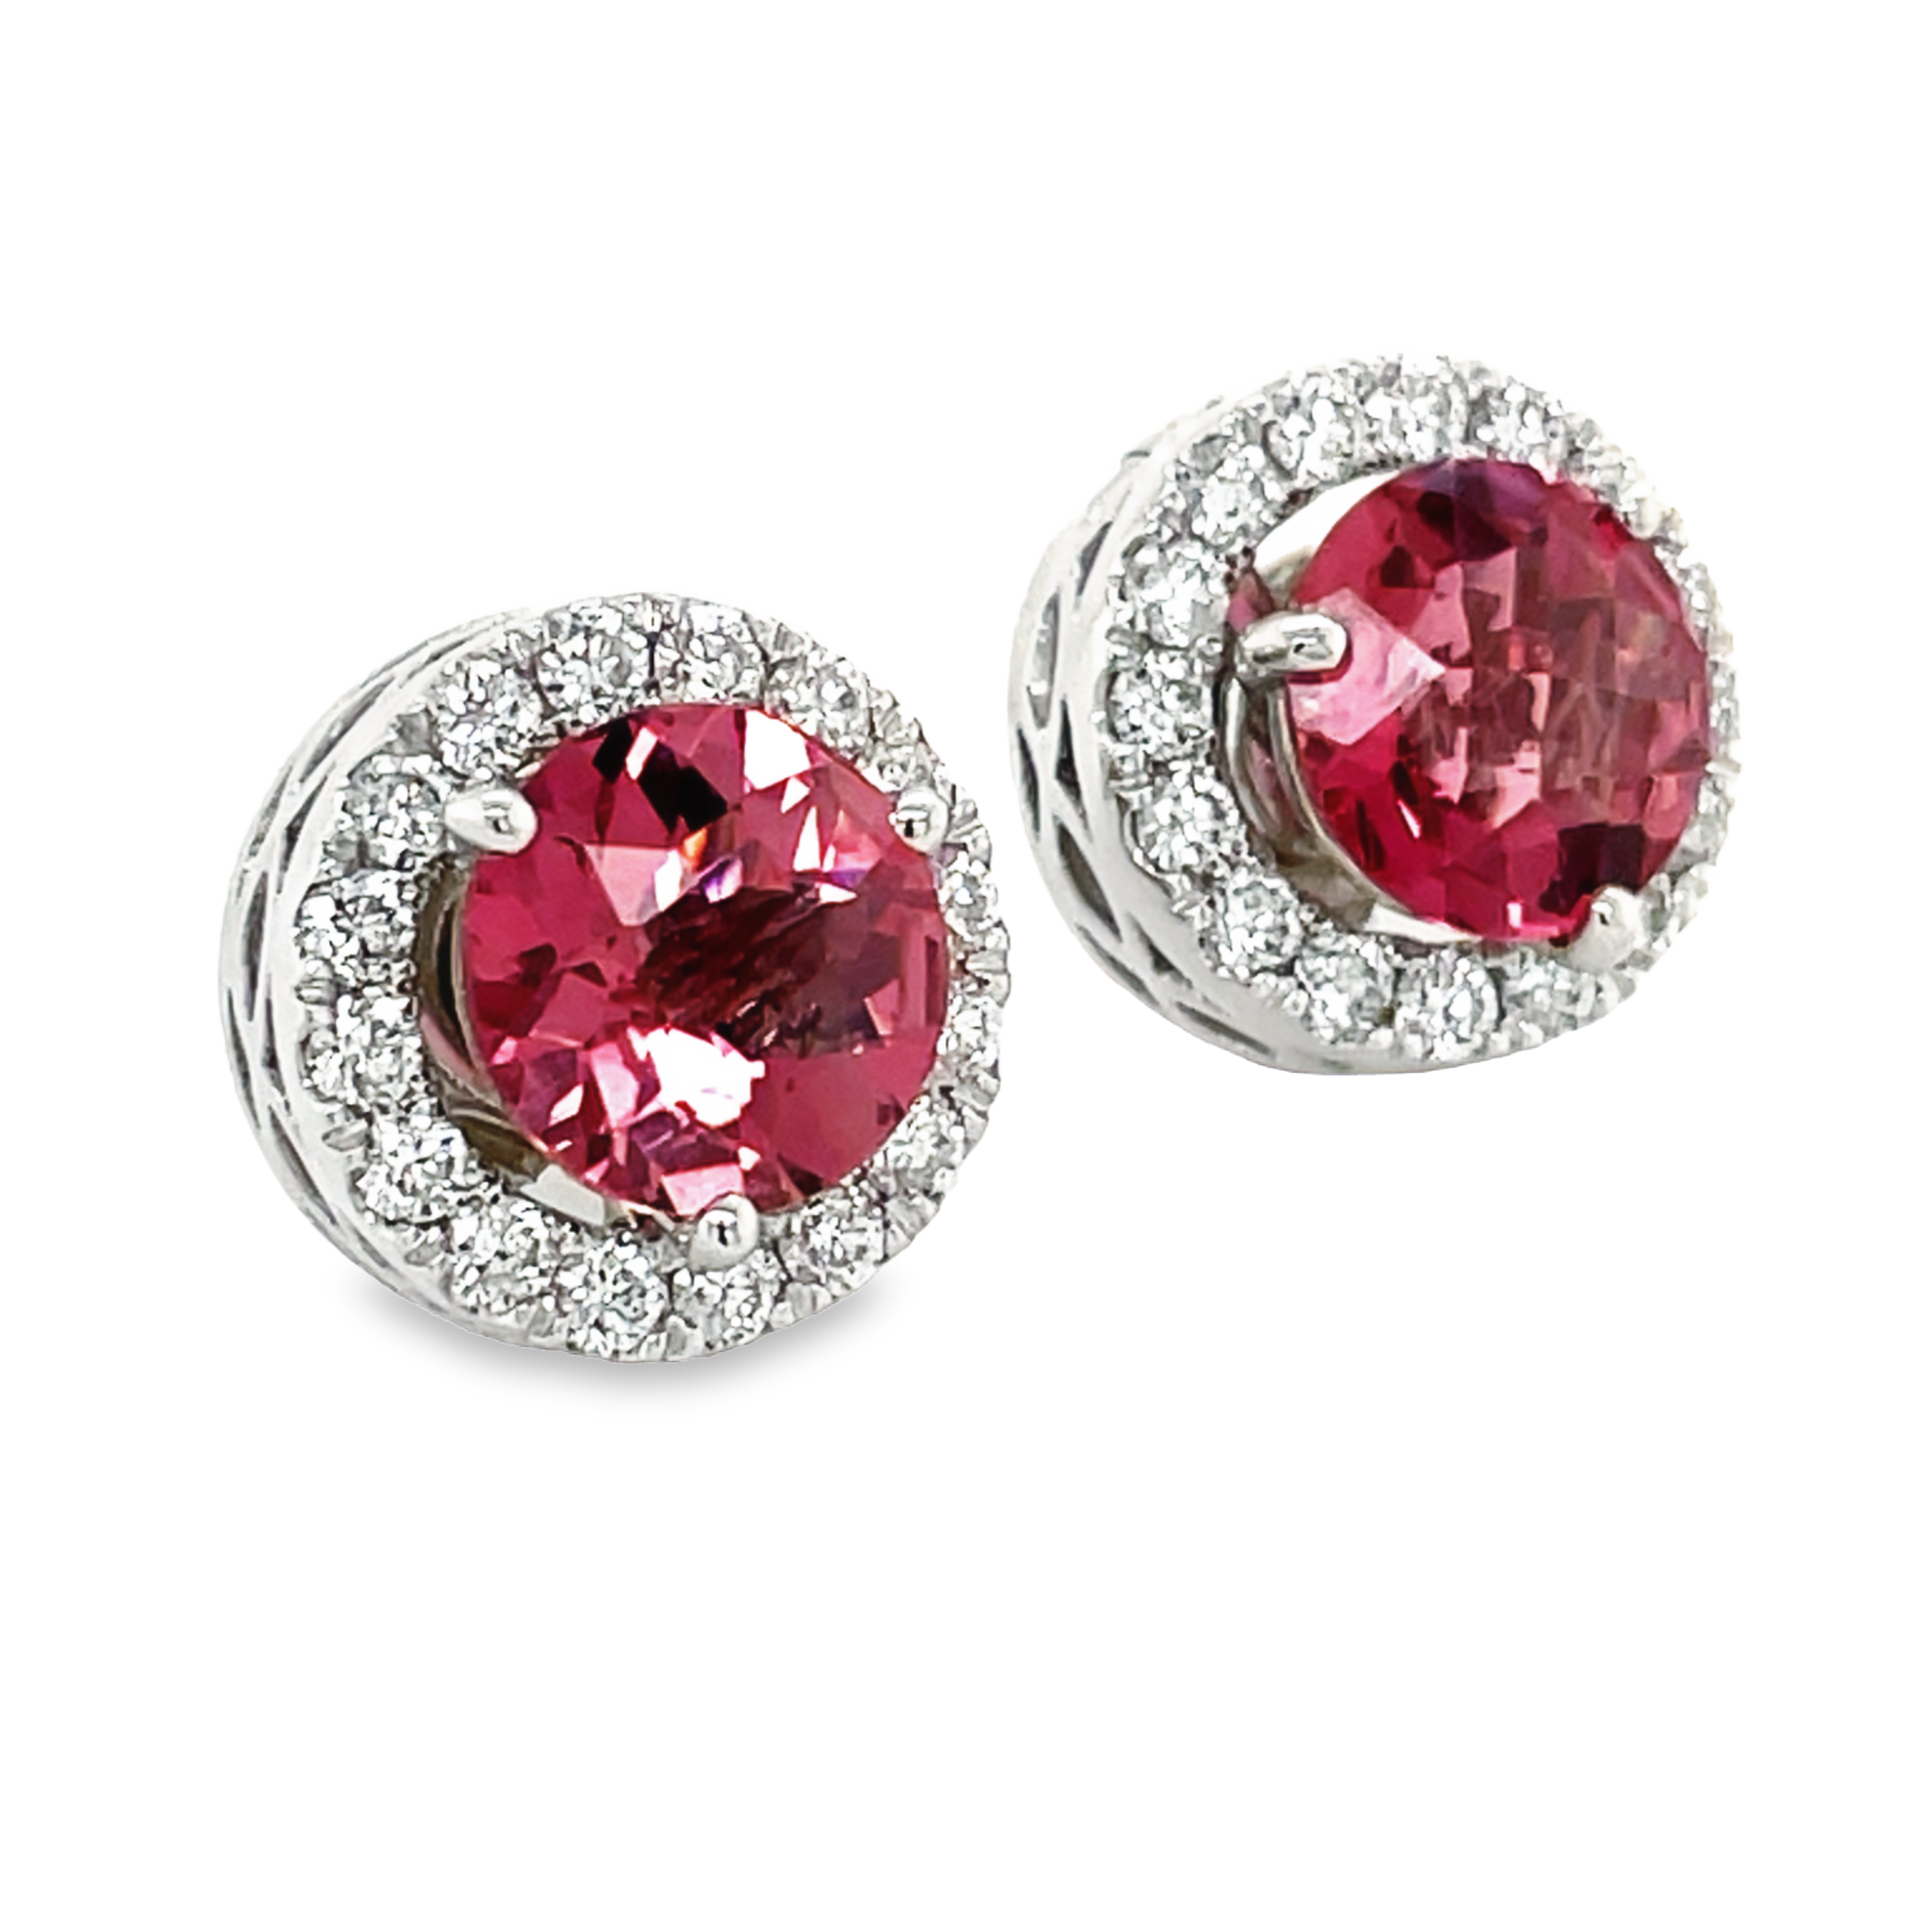 Two round rhodolite stud earrings   Set in 14k white gold   Secure friction backs  8.50 mm.  Great color  Diamond jackets are additional (150-800) 0.90 cts $2399.00.